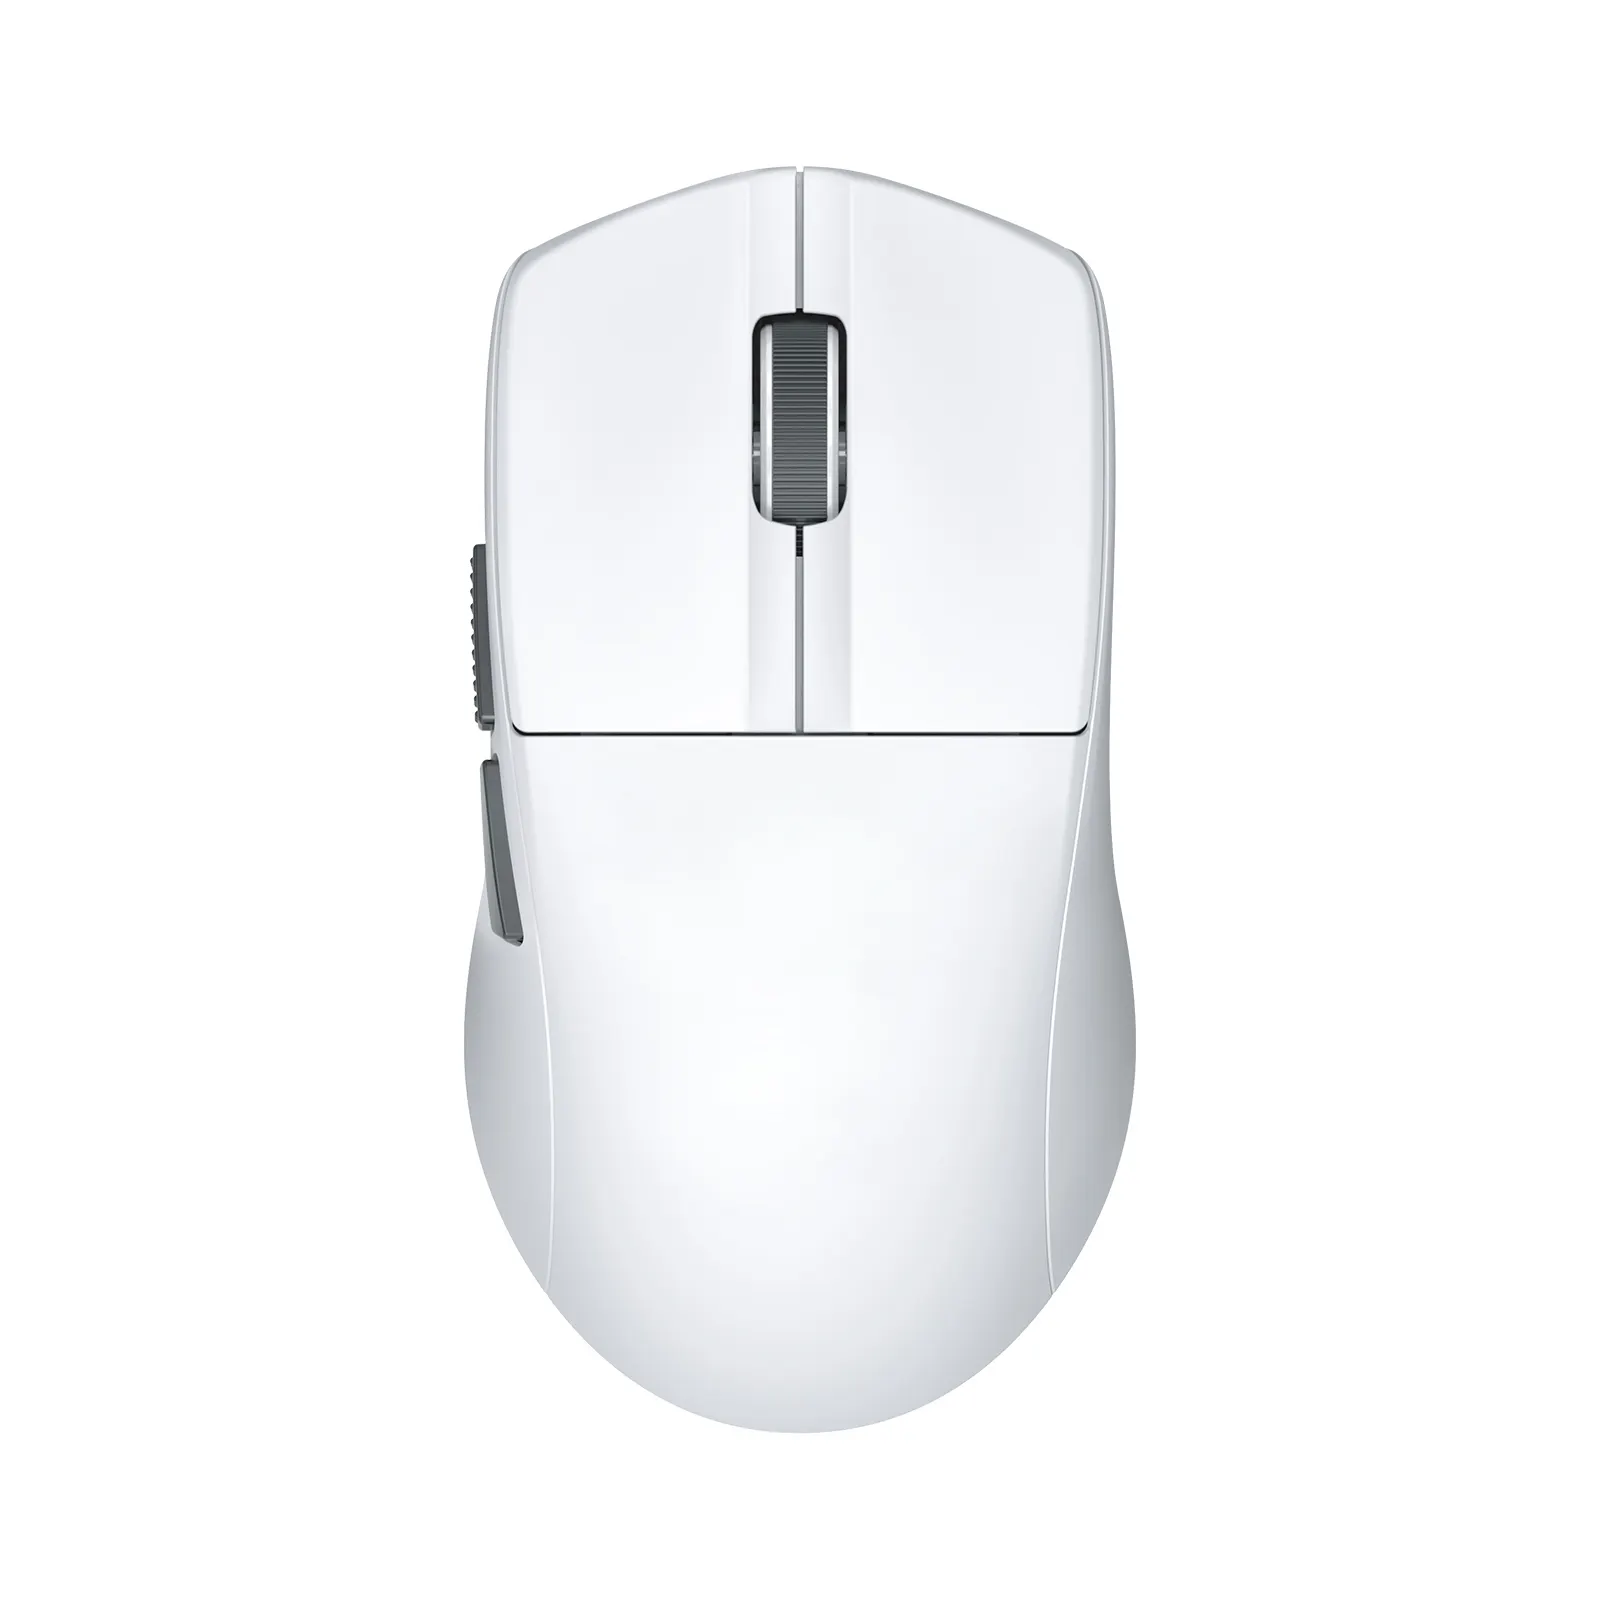 New Arrival 5 Programmable Button 1K Polling Rate High-precision 26000DPI optical sensor Wireless gaming mouse